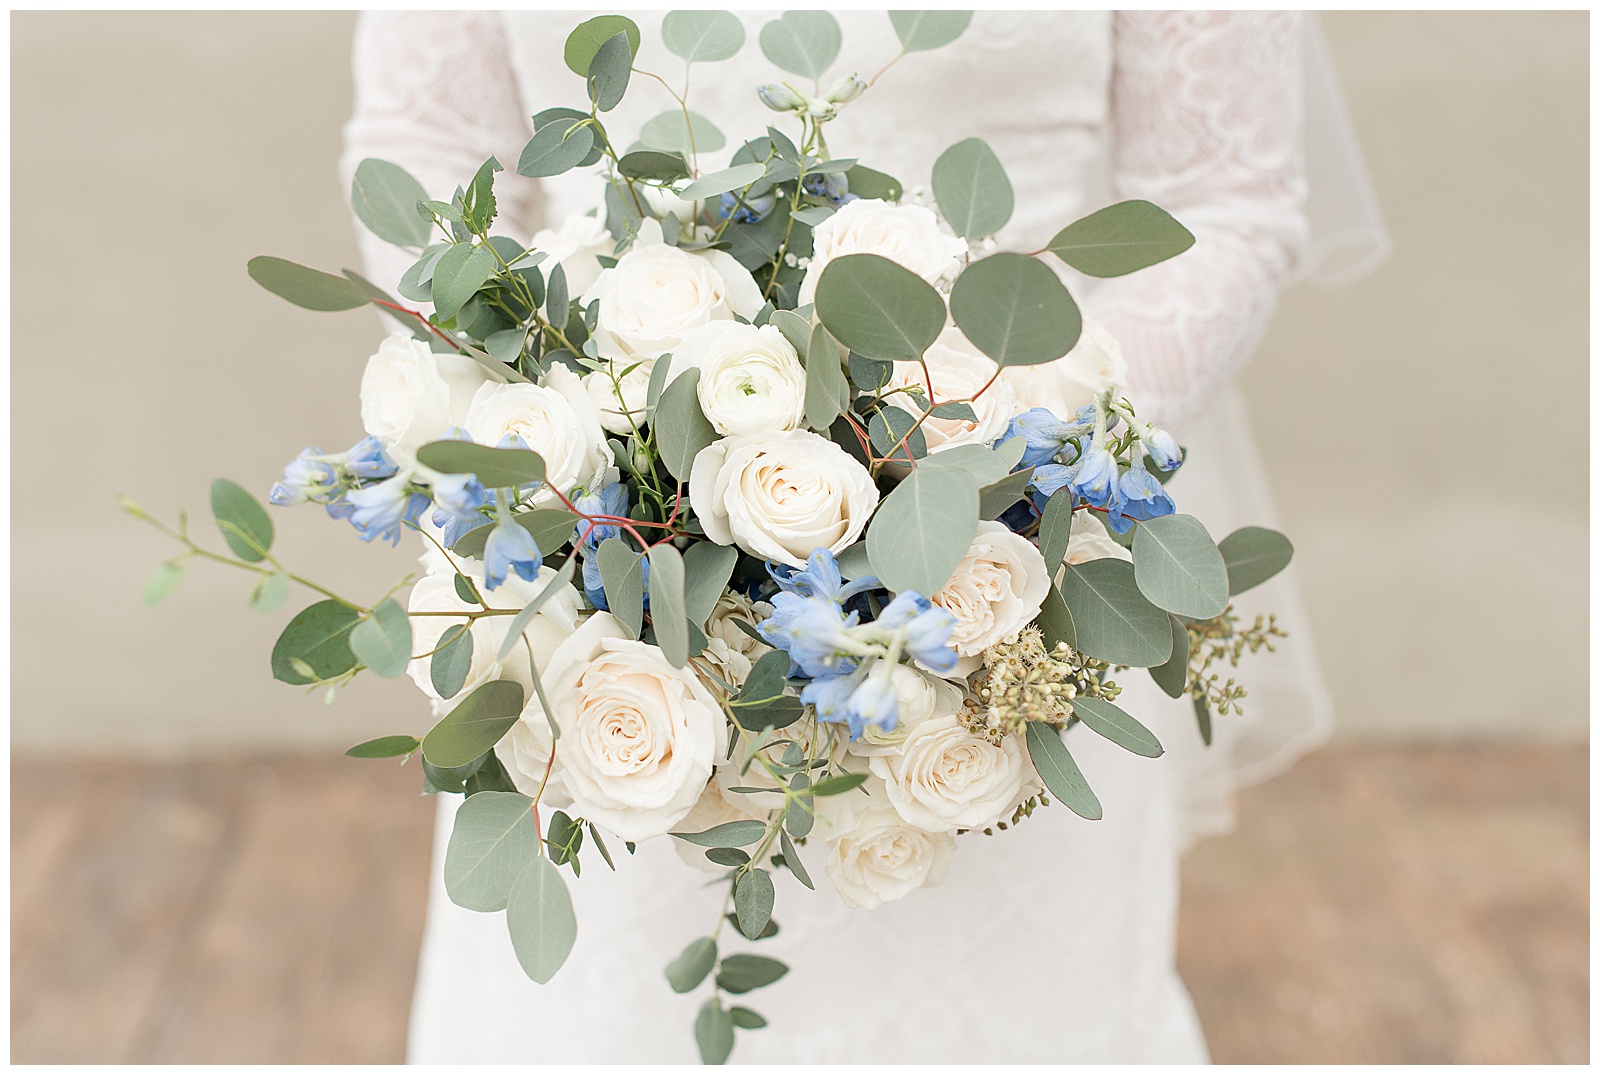 close up photo of bride's bouquet filled with silver dollar eucalyptus, white flowers and roses, and light blue flowers